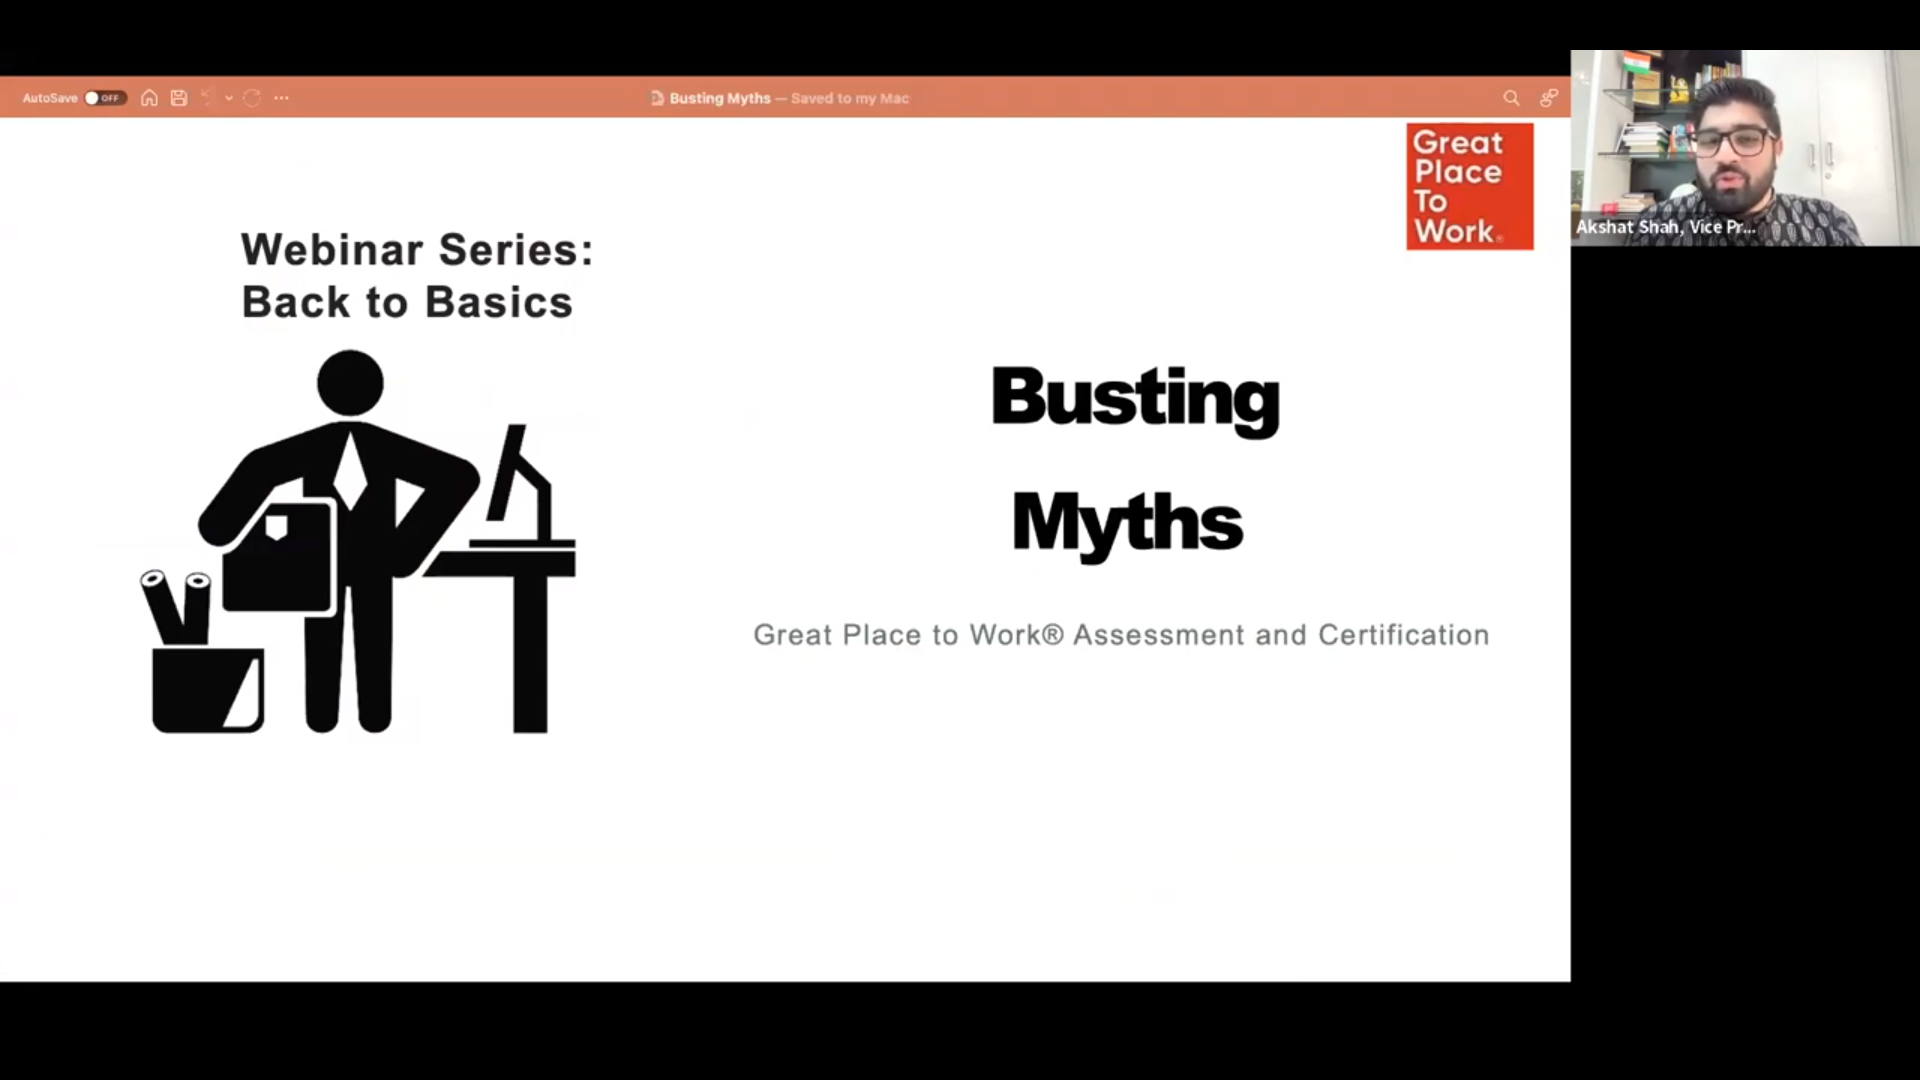 Busting Myths around the Great Place to Work® Certification